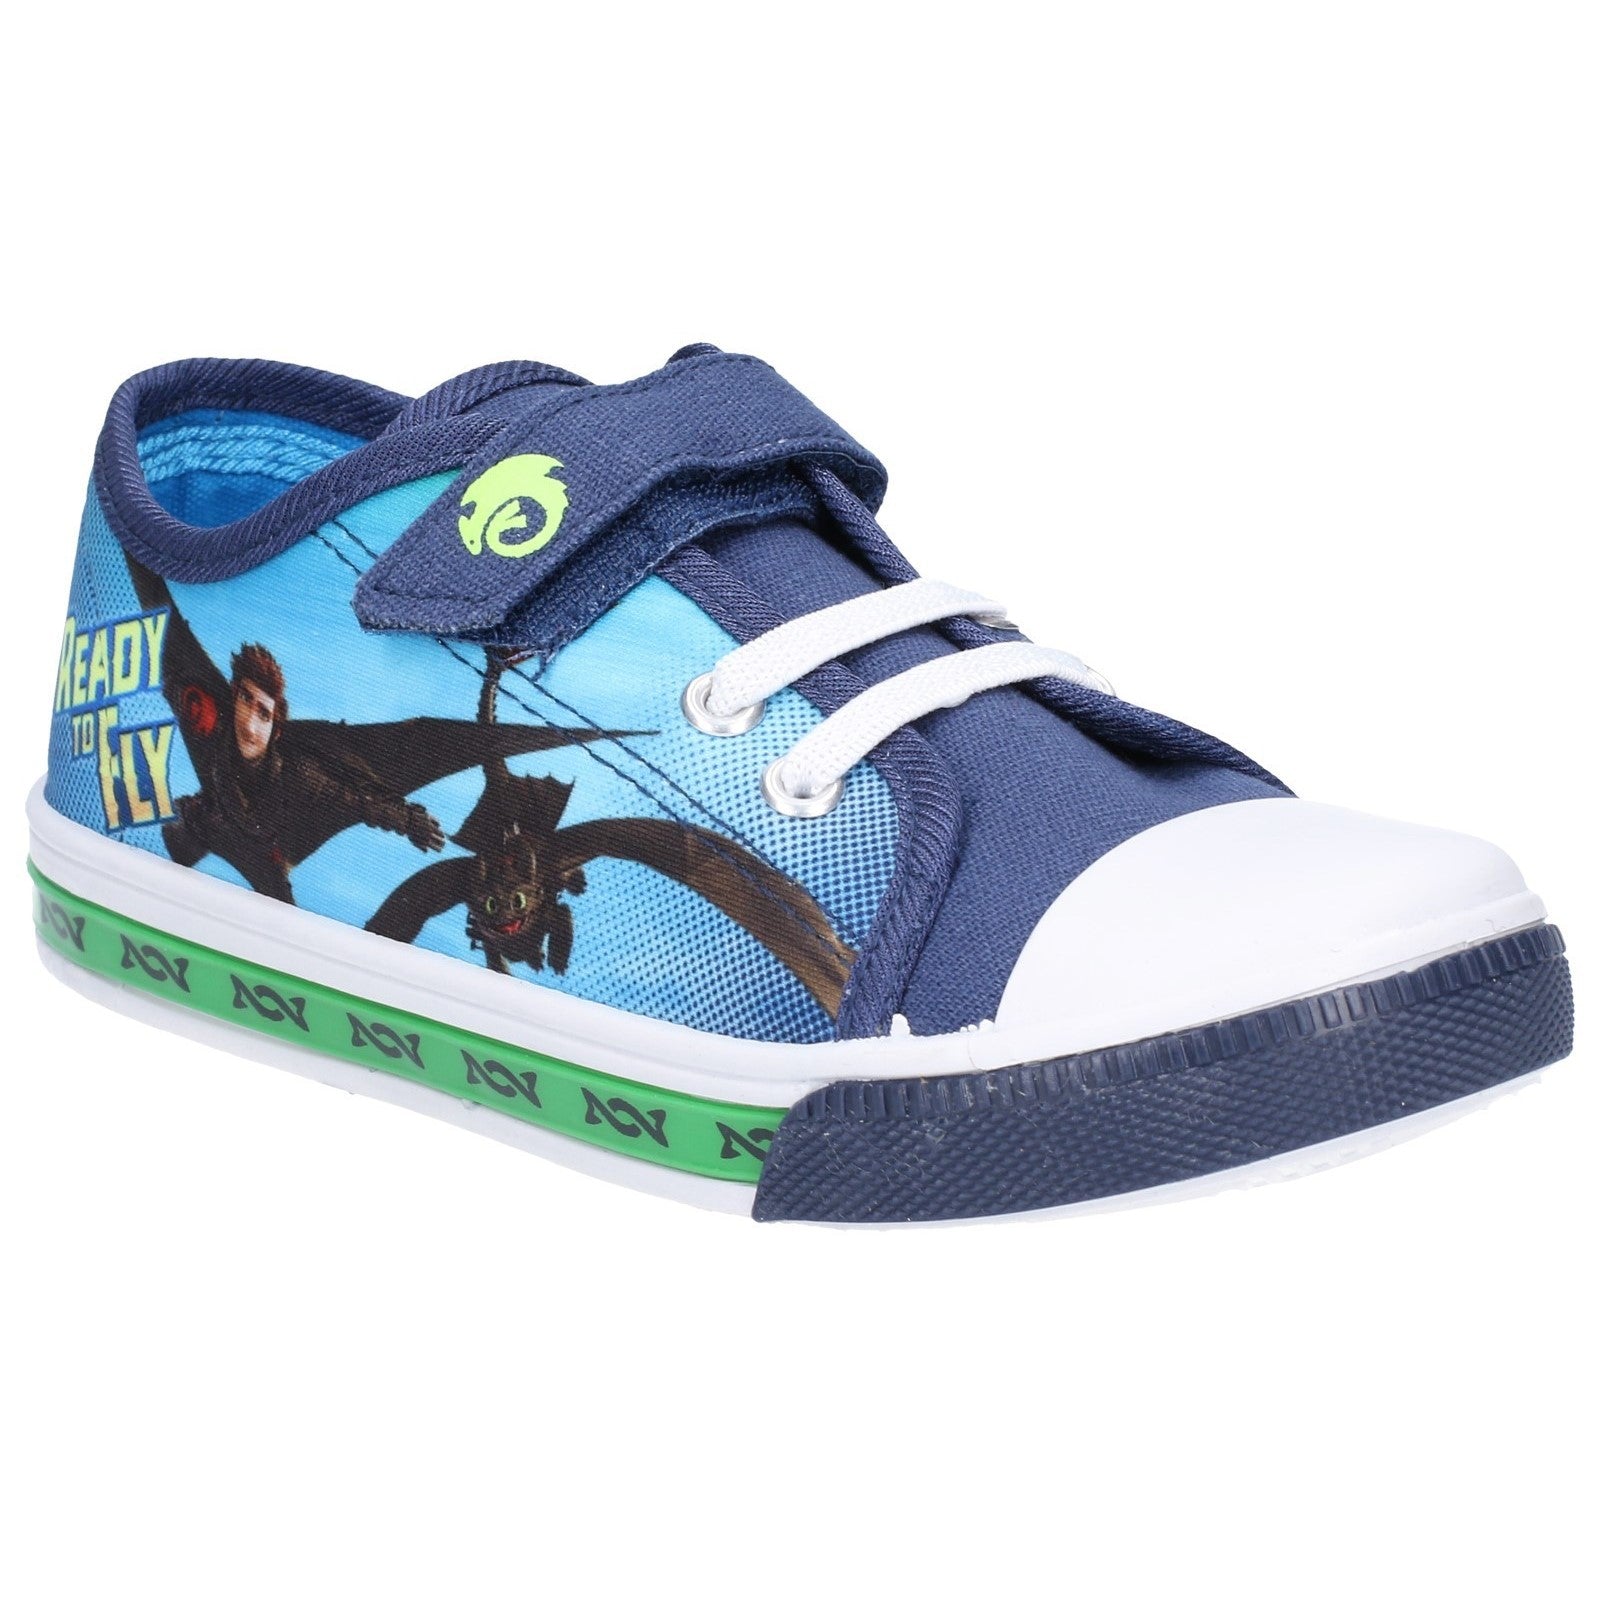 How to train your dragon Low Sneakers touch fastening shoe, Leomil